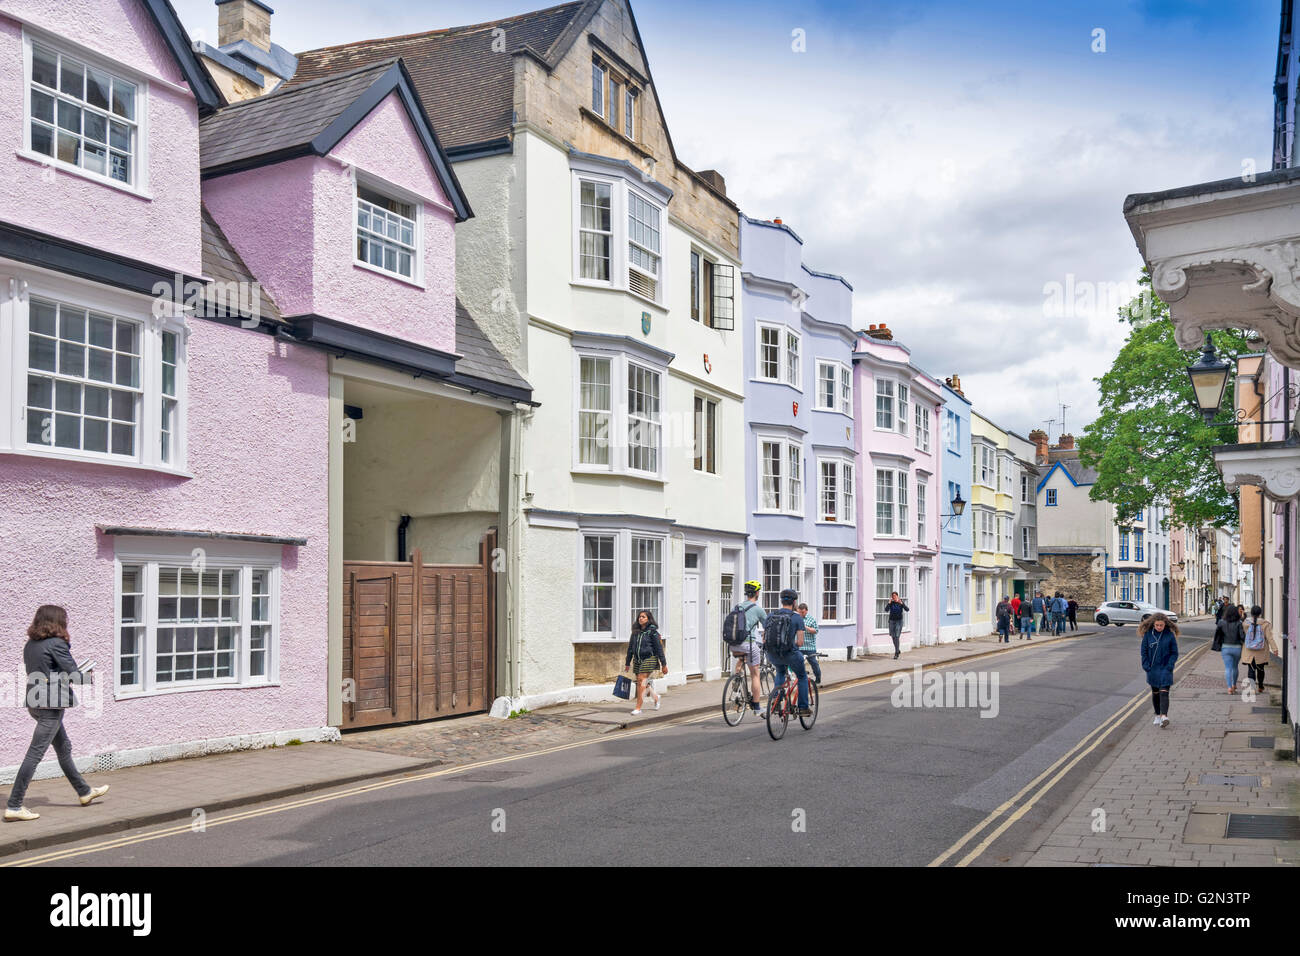 Case colorate DI OXFORD CITY STUDENT ACCOMMODATION IN HOLYWELL STREET Foto Stock